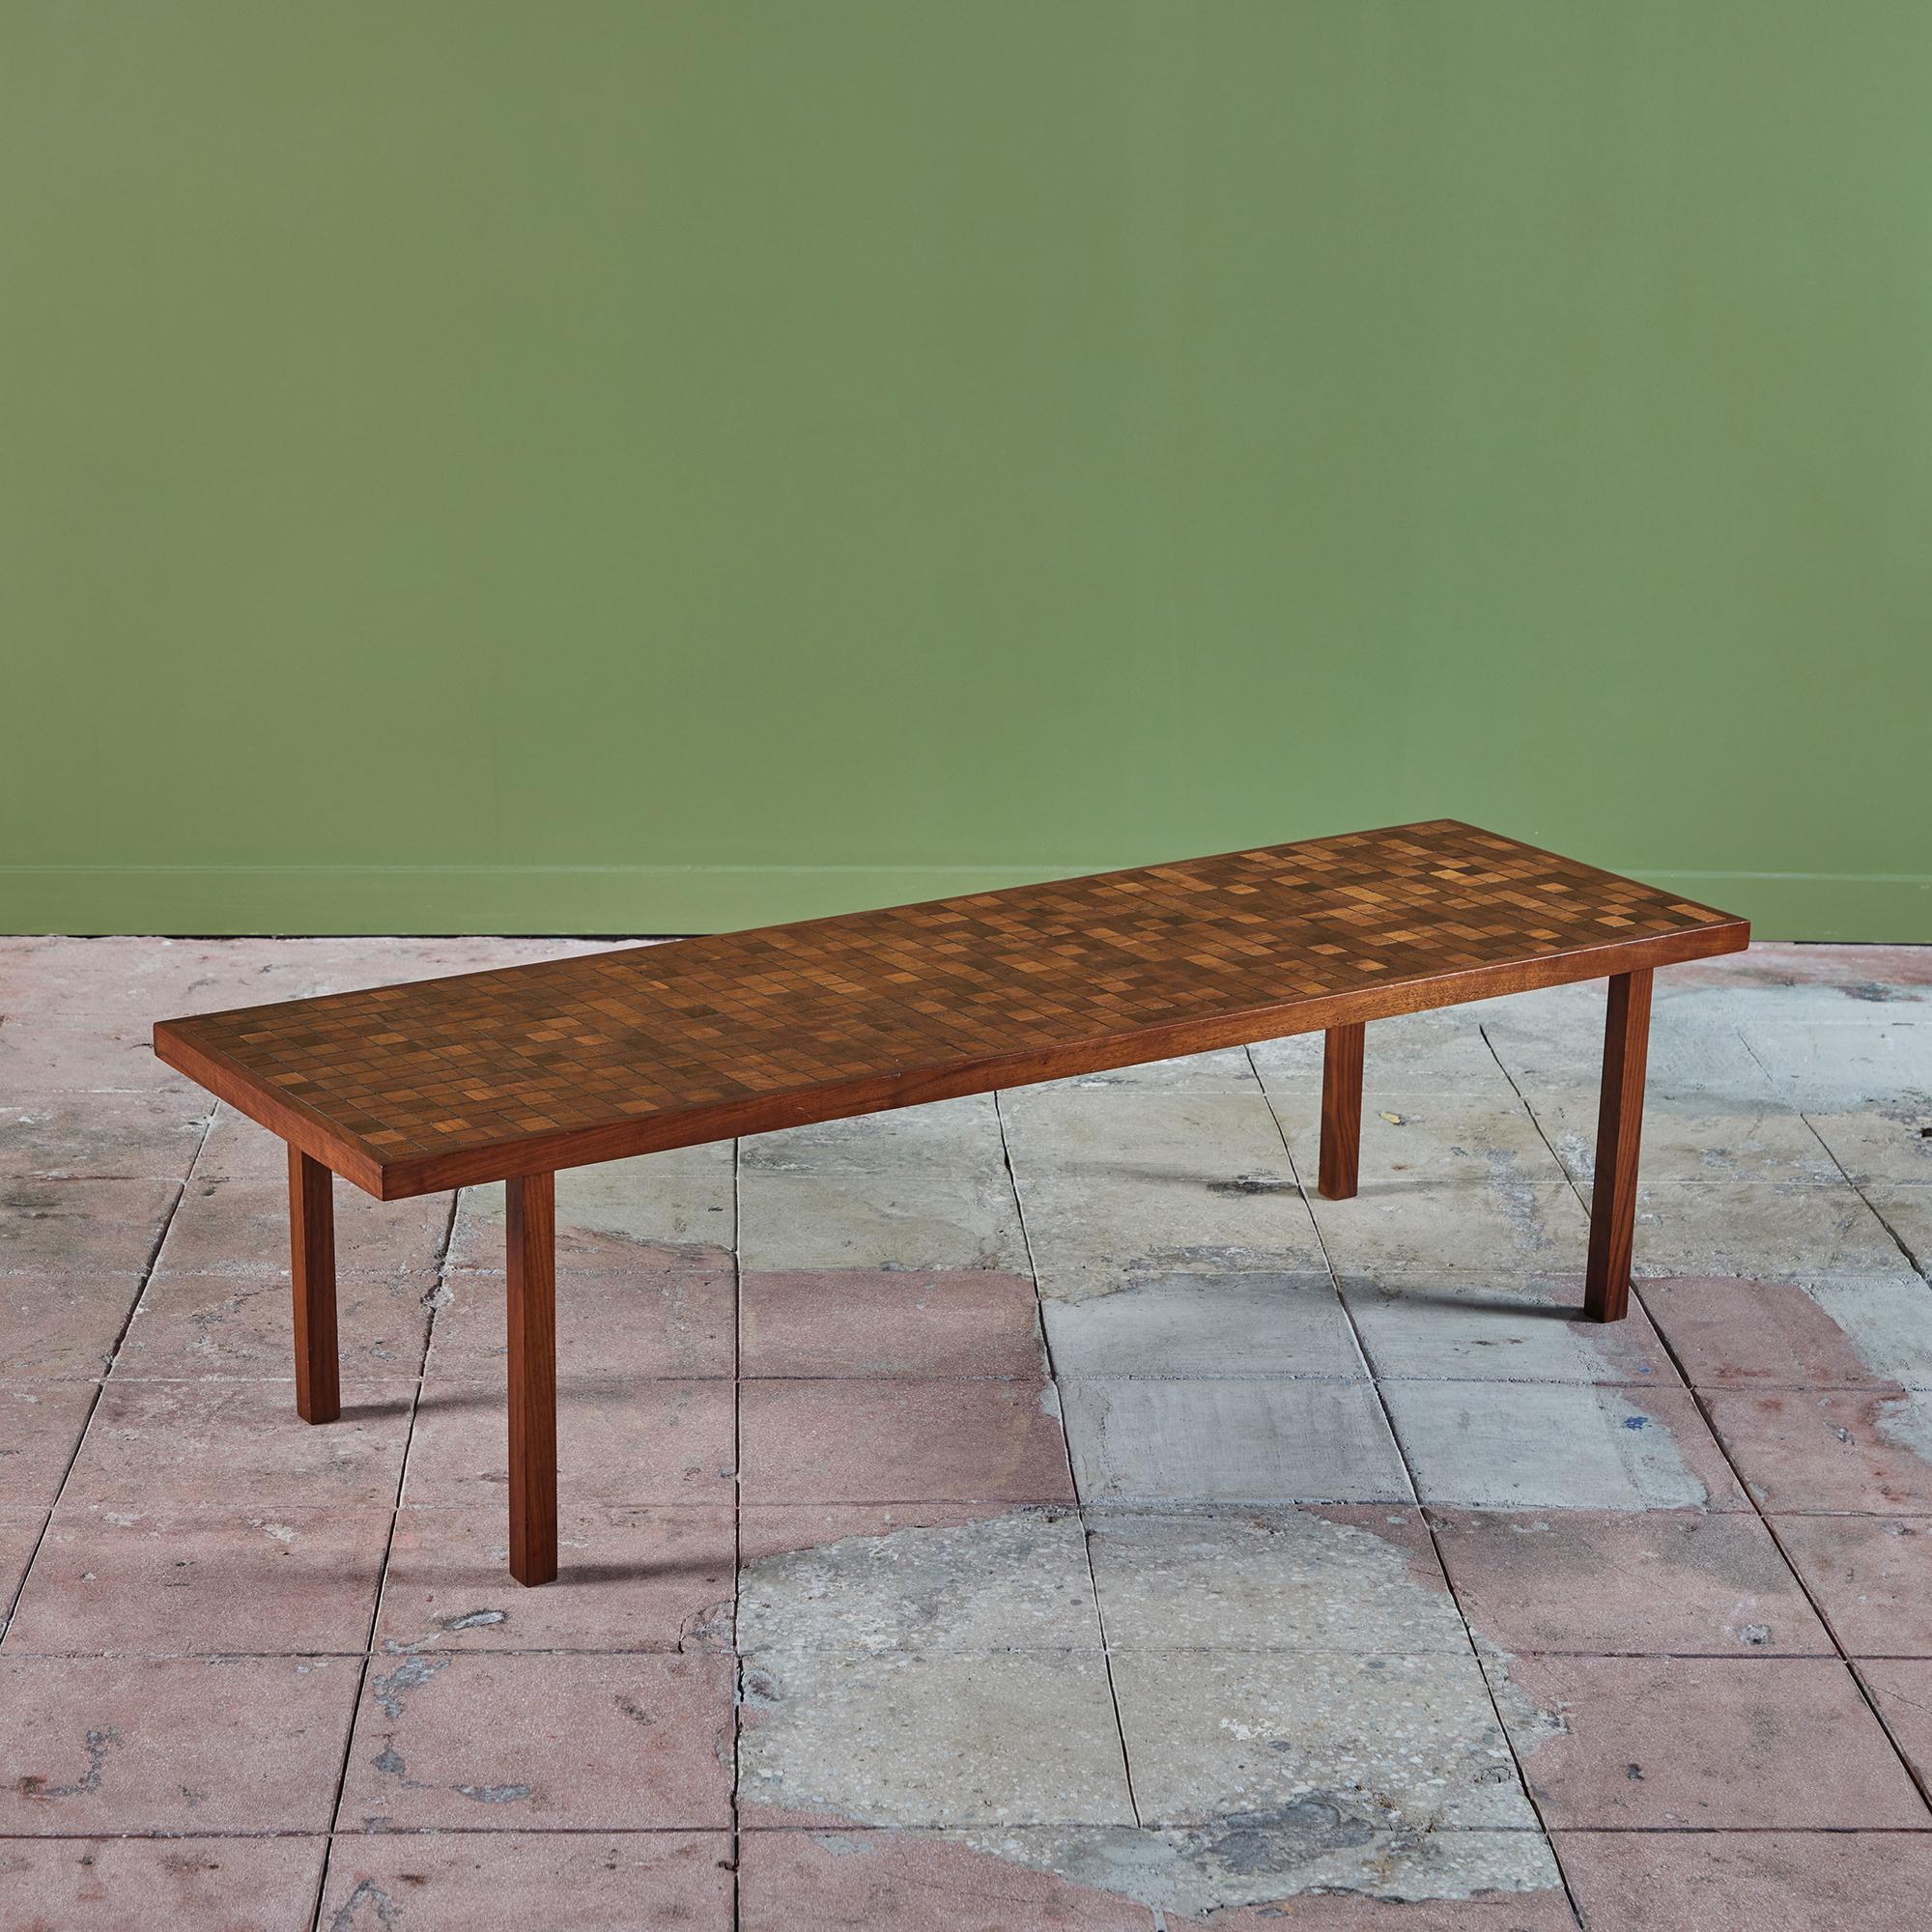 Rectangular walnut coffee table by Gordon & Jane Martz. The table top is inlaid with square tiles in a geometric pattern. The tiles feature varying wood grains and brown tones. The frame, and table legs are solid walnut.

Dimensions
60.25